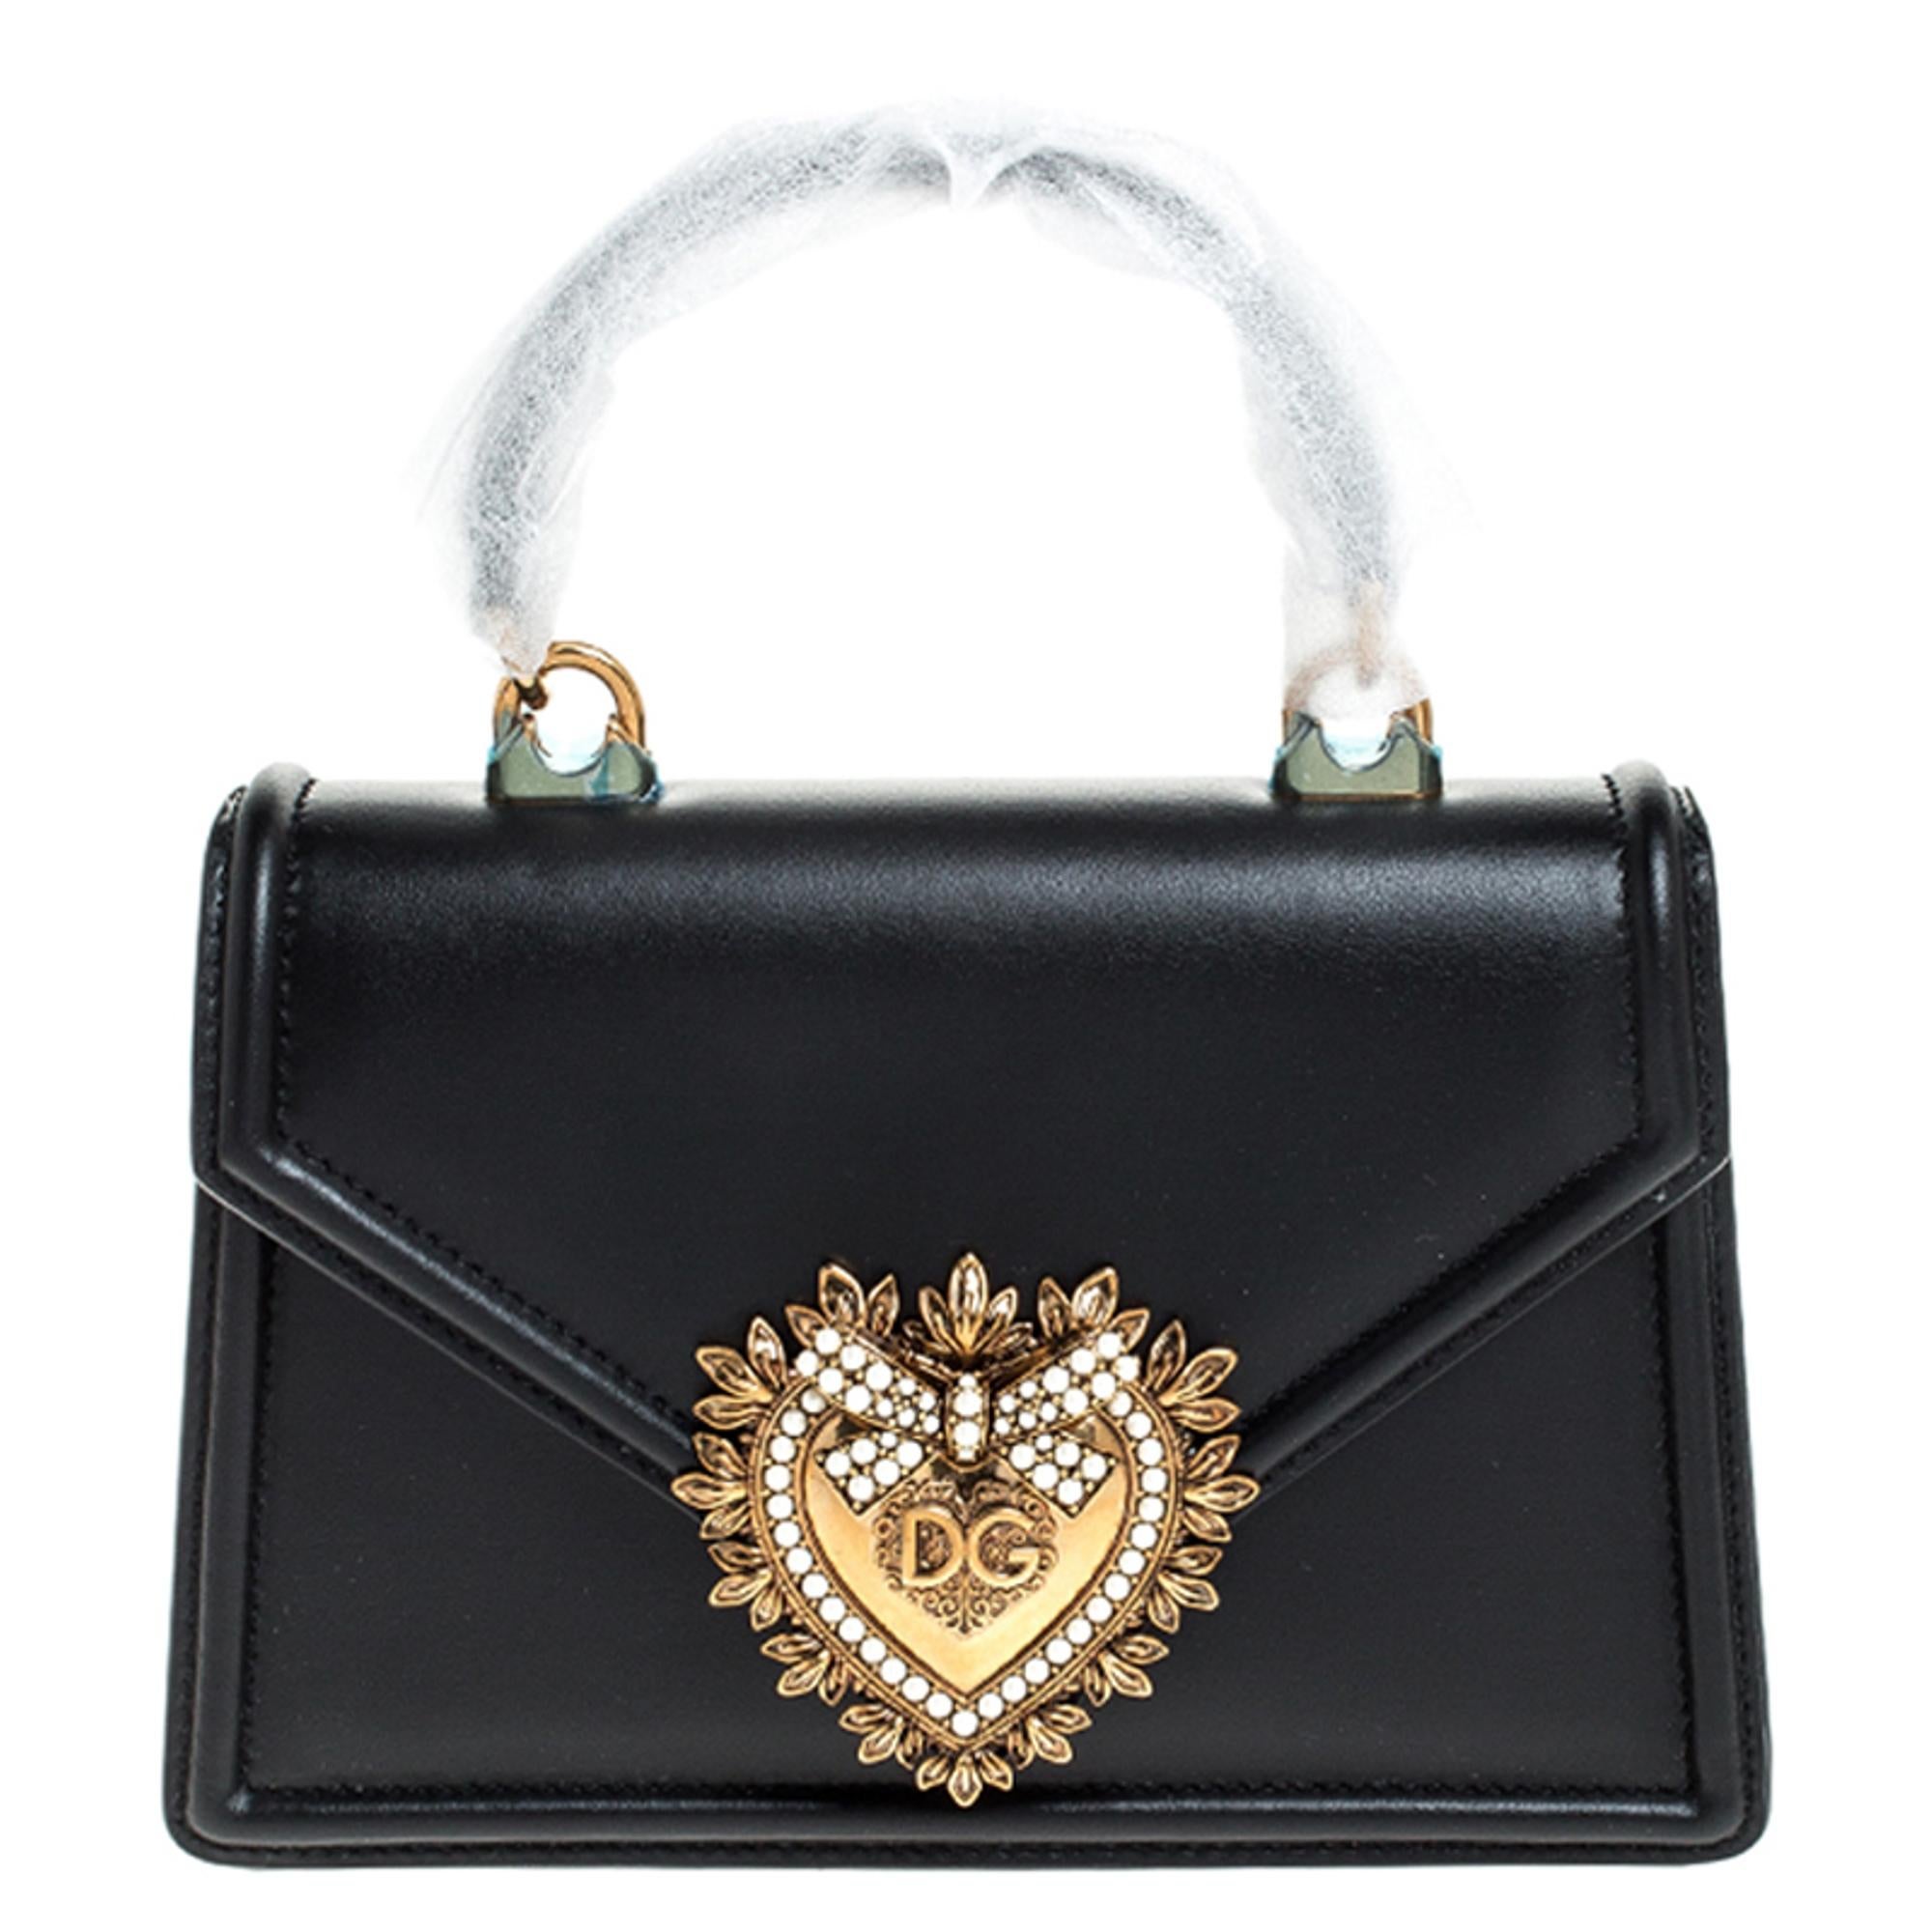 Step out in style by adorning this bag from Dolce & Gabbana. It has been crafted from leather and flaunts the Devotion heart motif in gold-tone on the front. It features well-designed leather-lined interior housing a slip pocket. The bag is complete